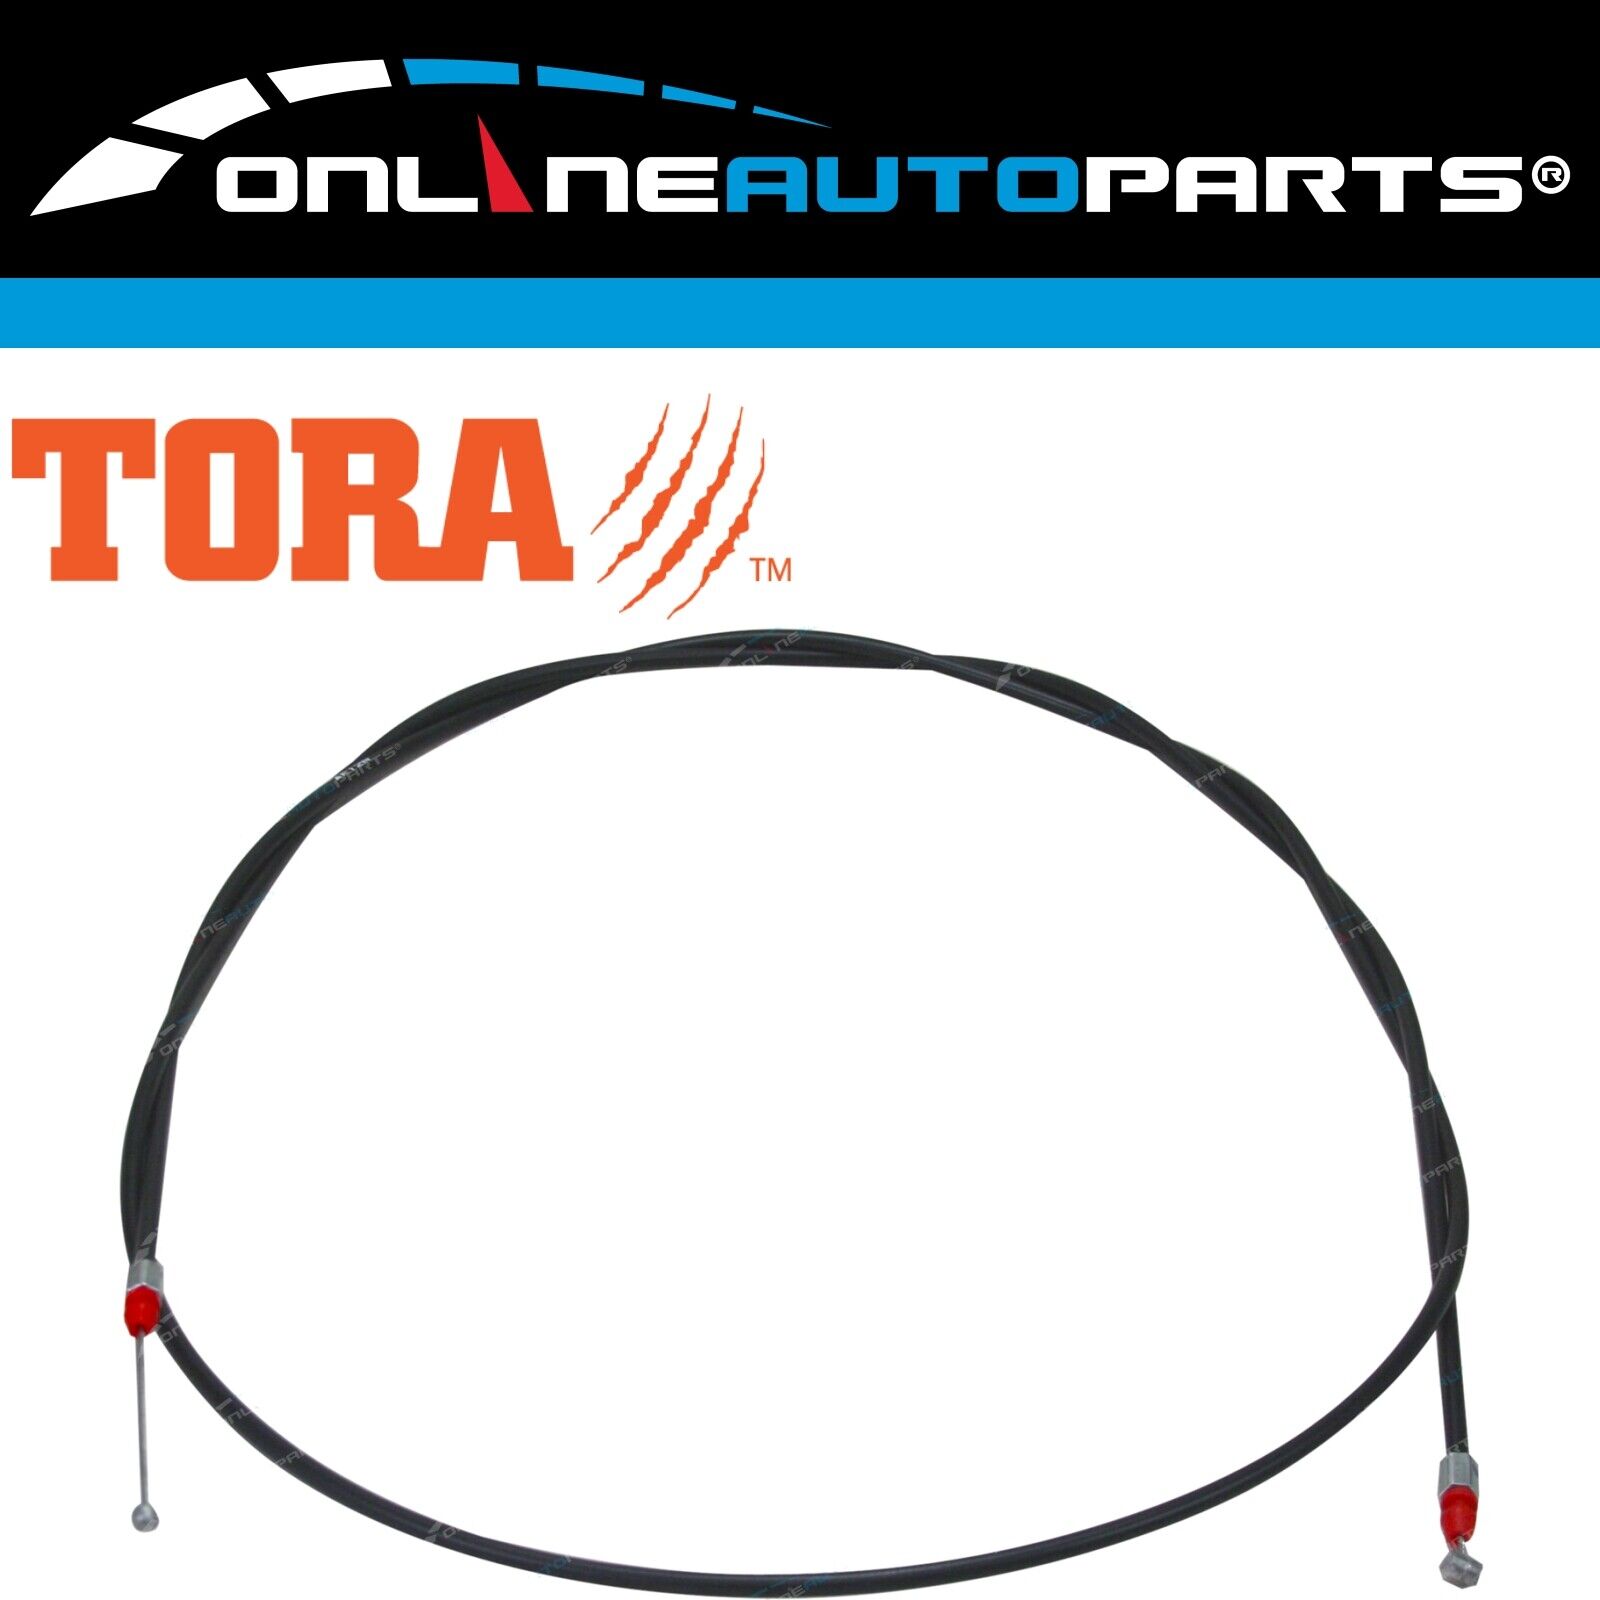 Bonnet Hood Release Cable for Toyota Hilux 1997 to 2005 4x4 Utility Ute